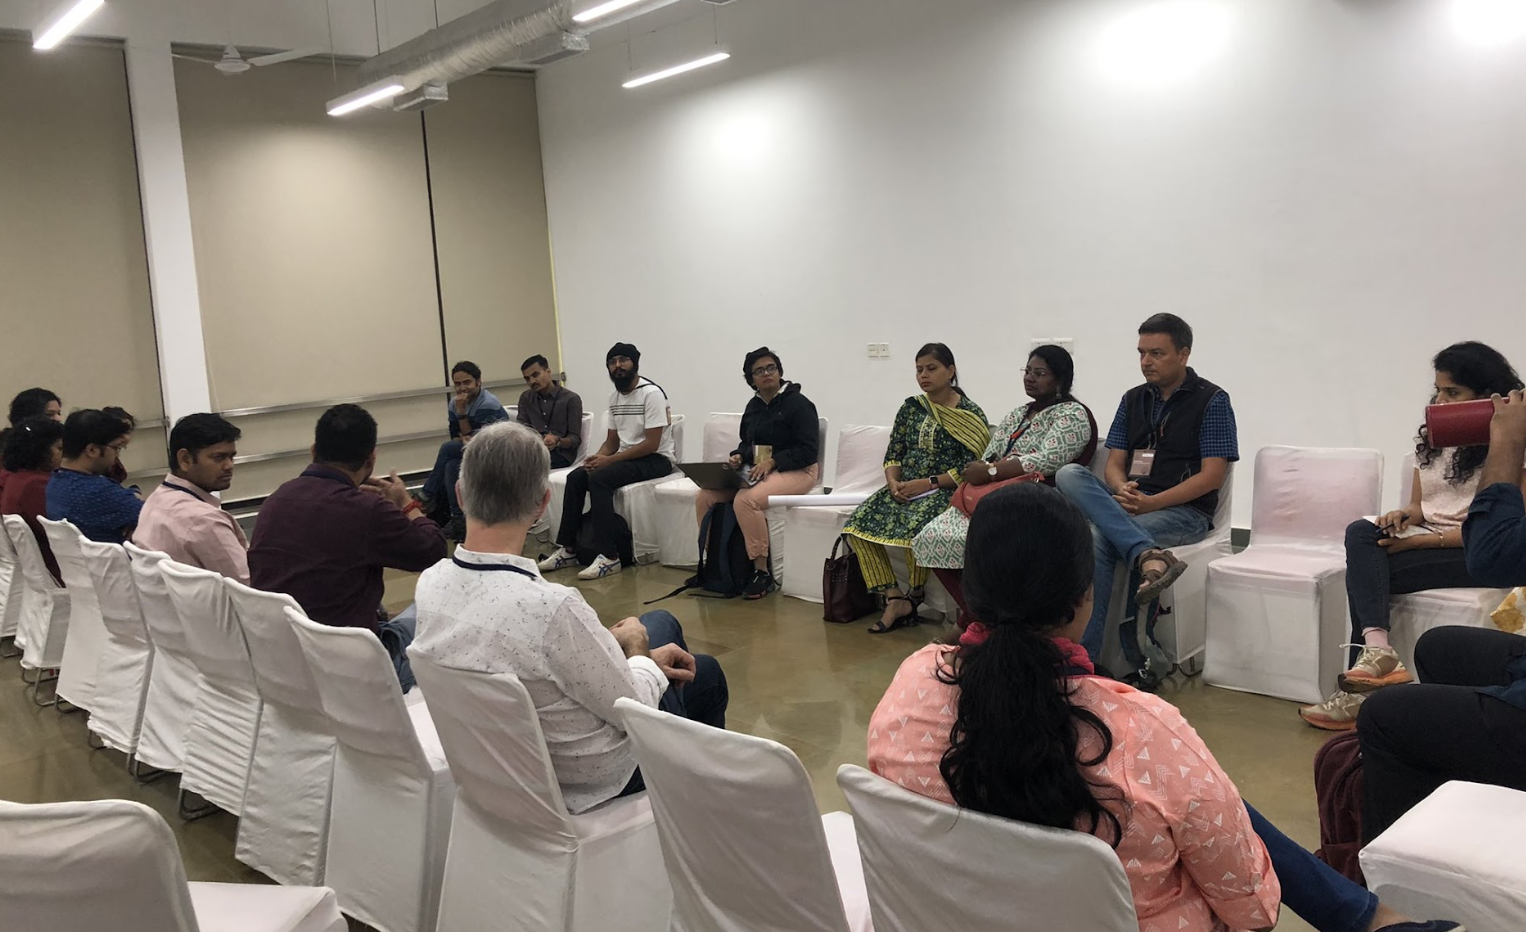 One of the breakout sessions during YIM 2023. Credit: Dhiraj Bhatia